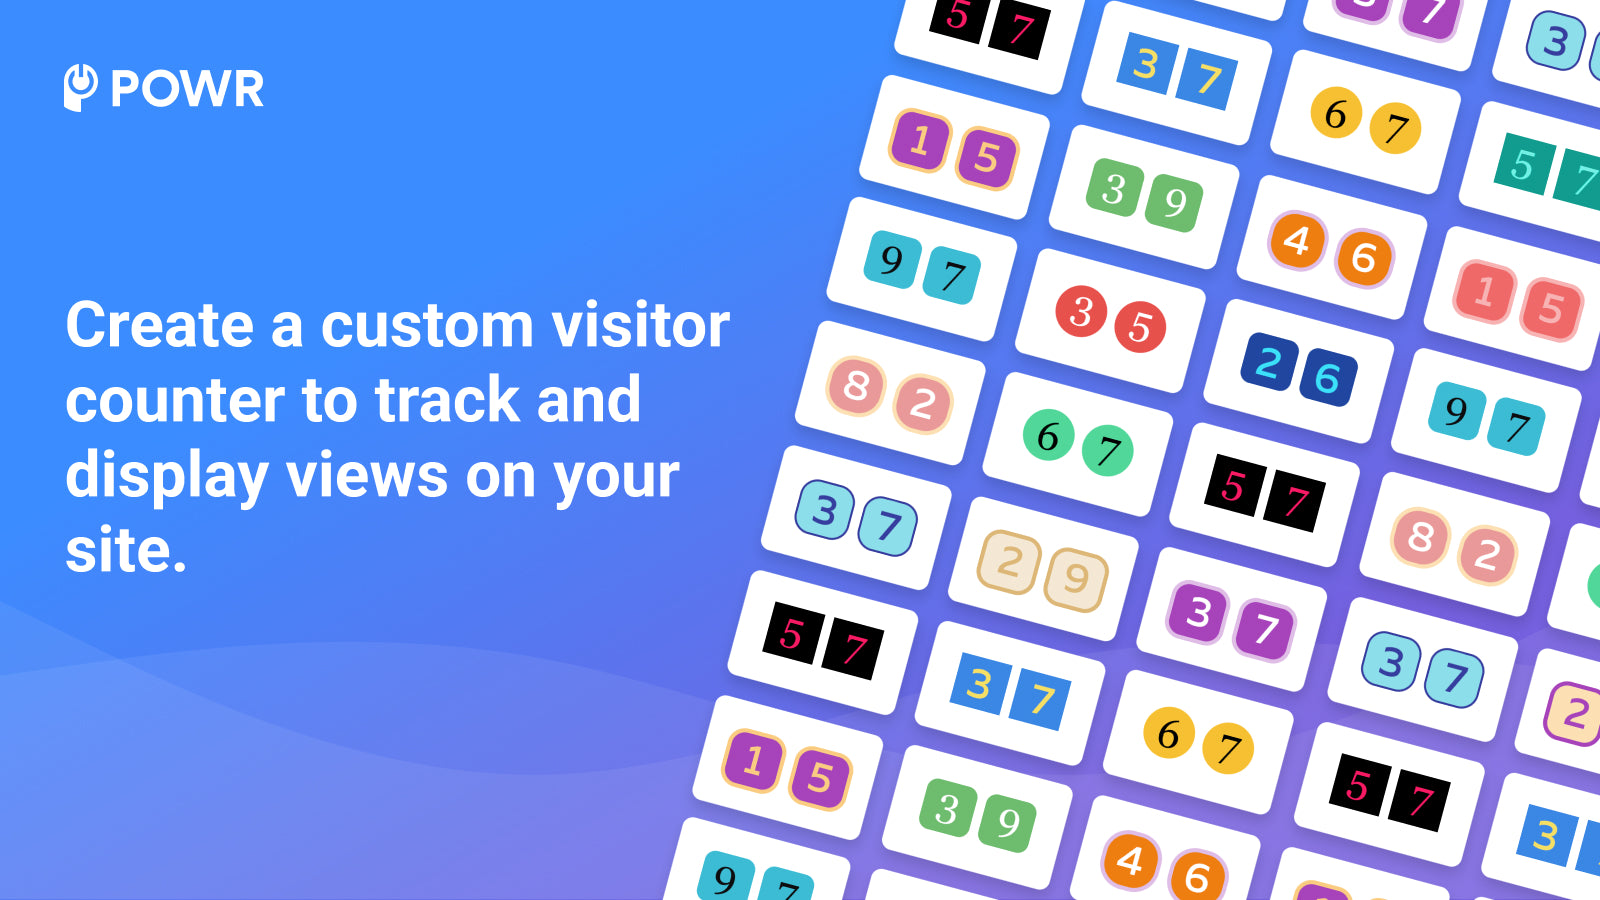 Create a custom visitor counter to track views on your site.